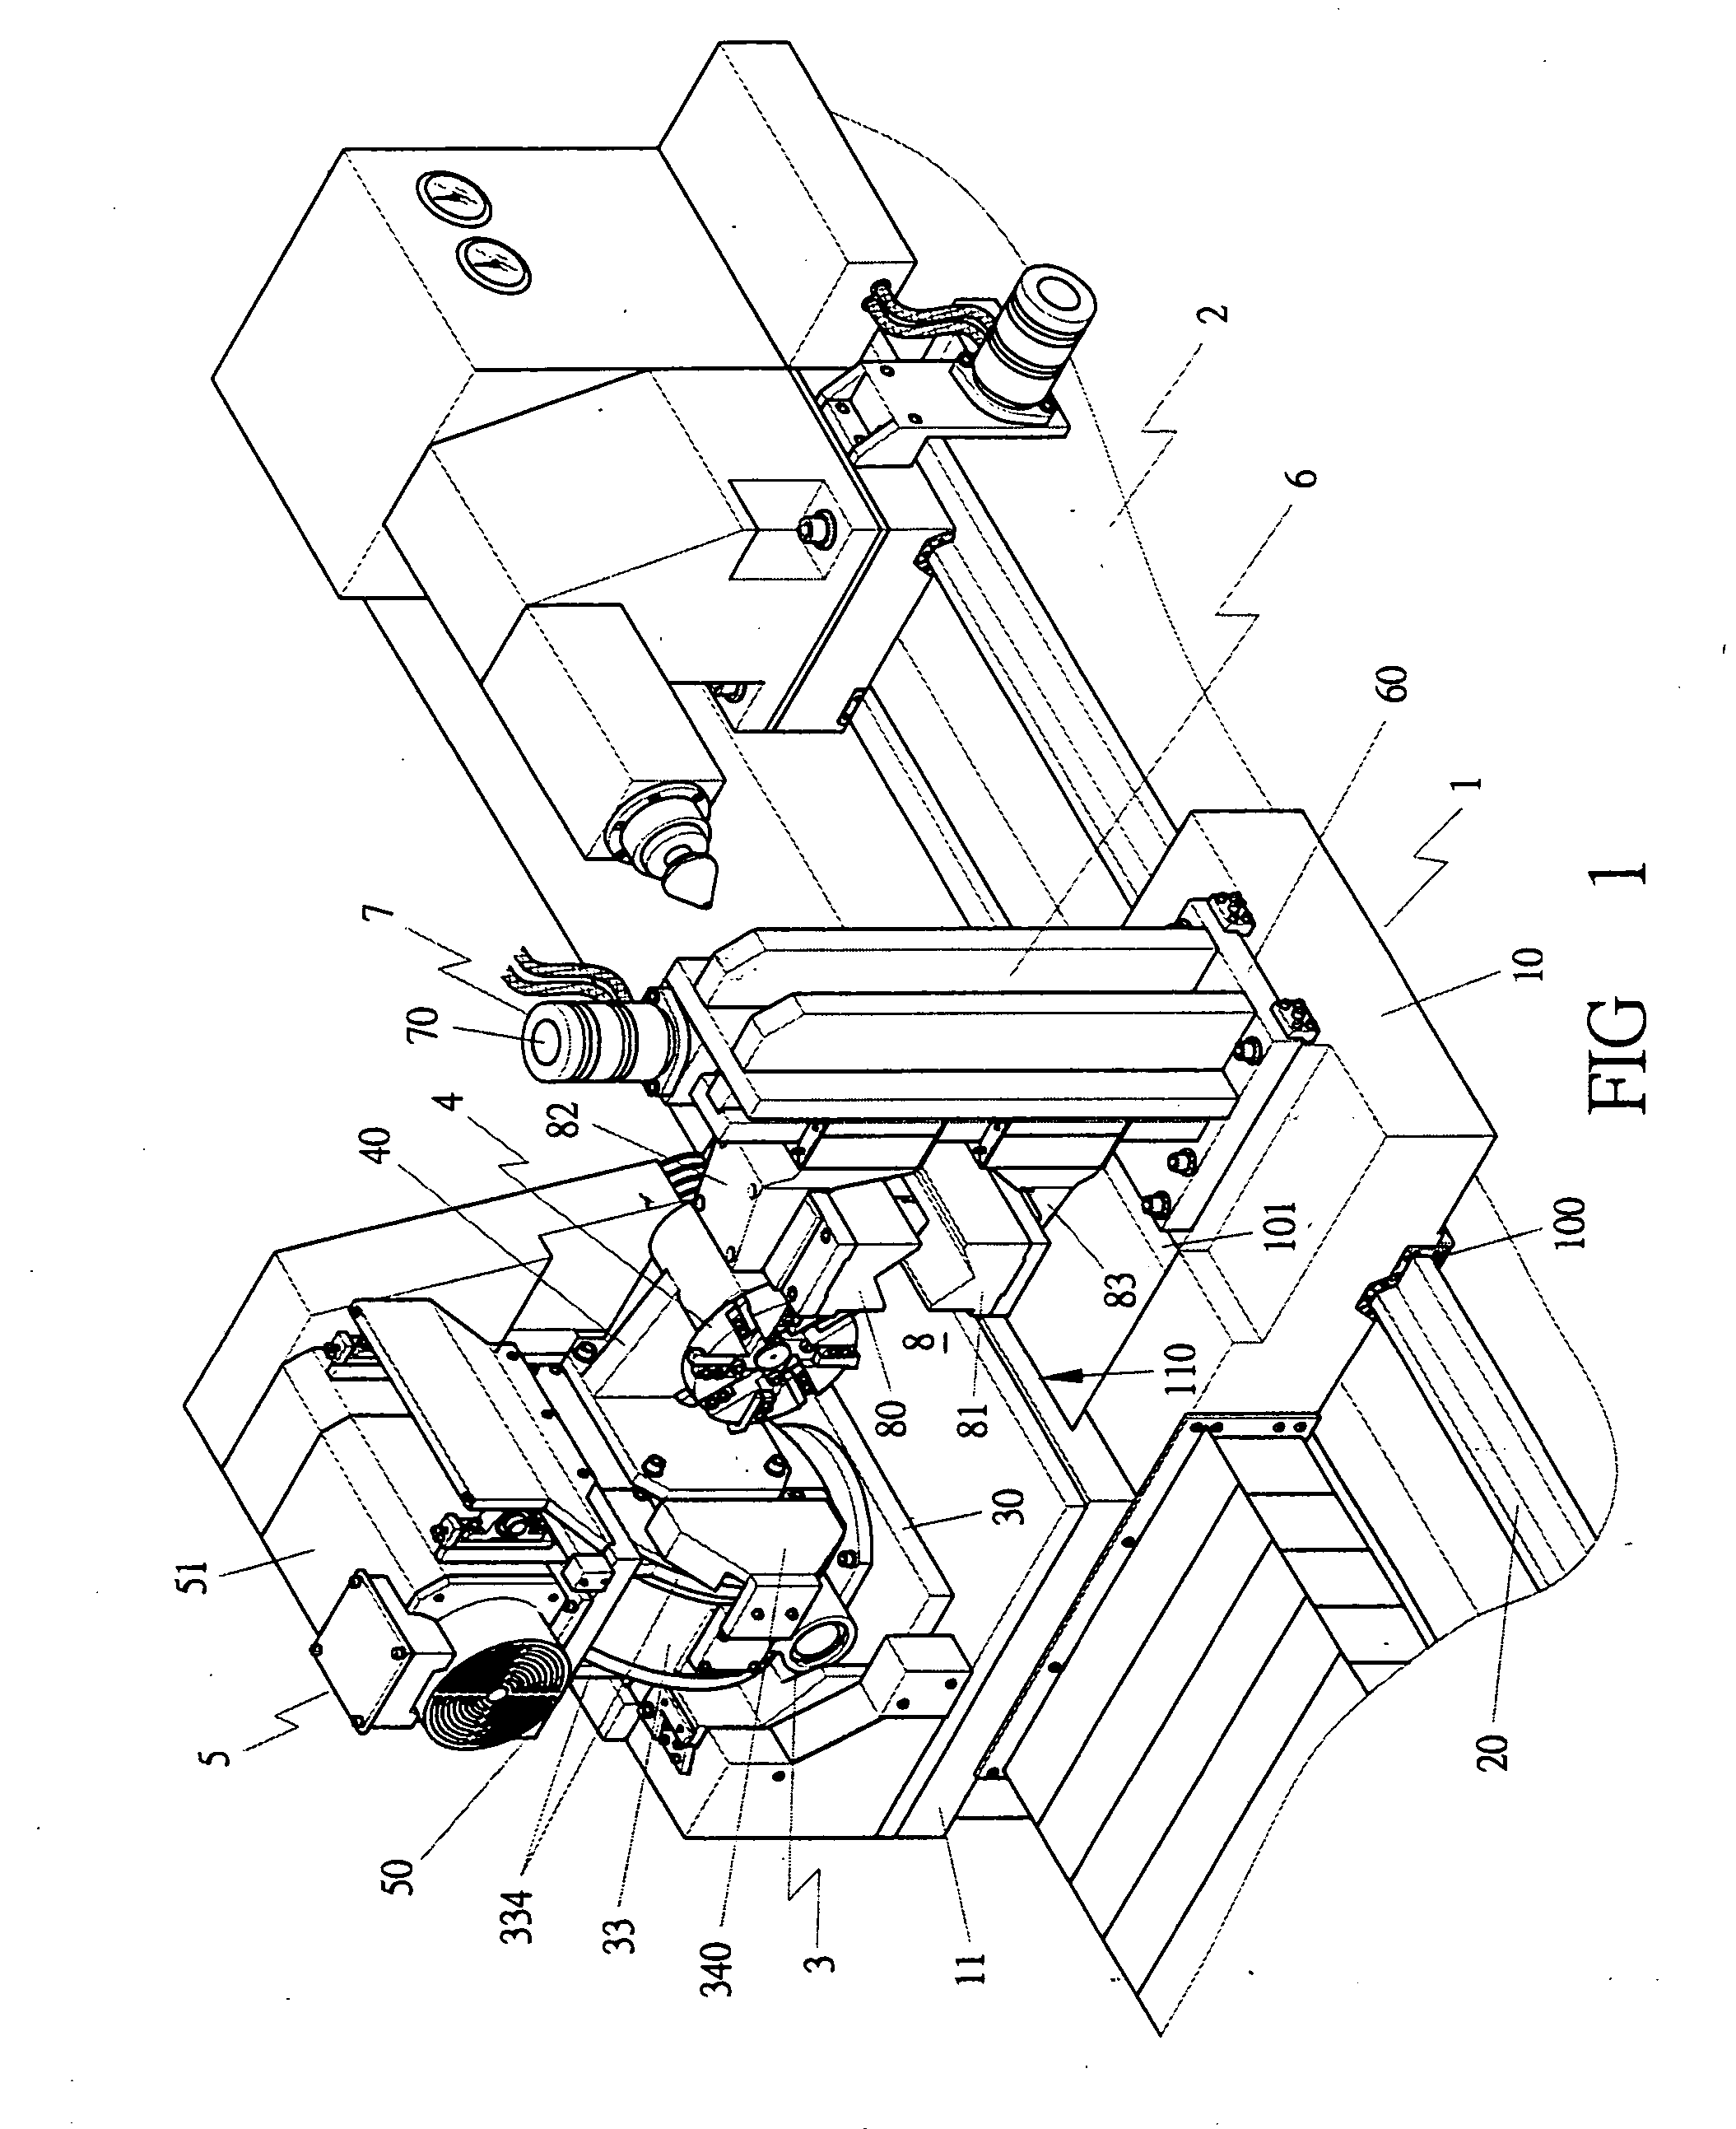 Rotary cutting and clamping device for a processing machine